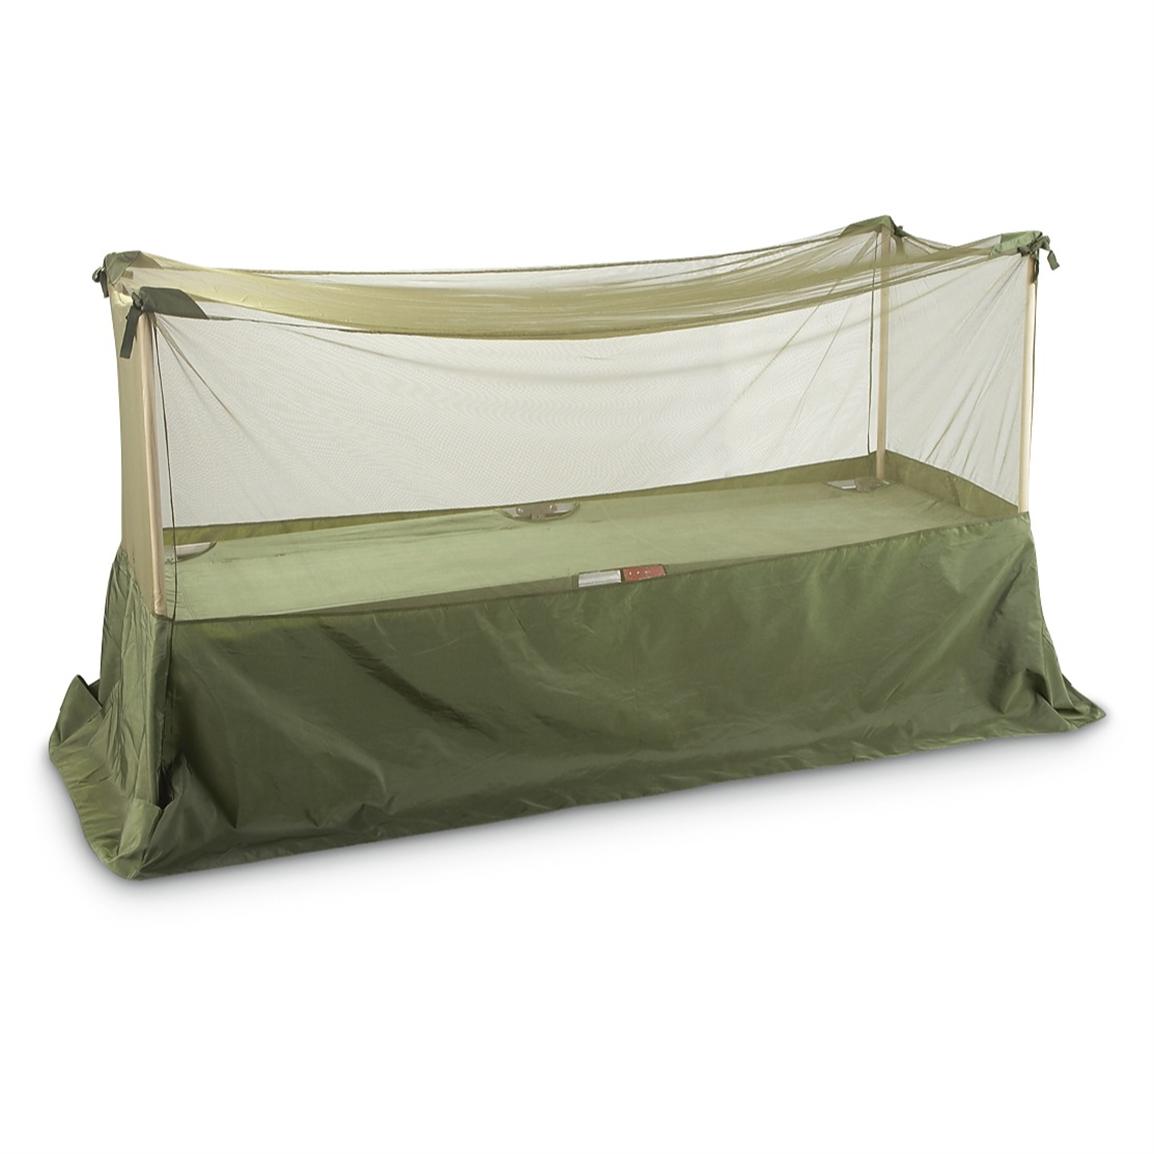 New British Military Mosquito Net with Poles